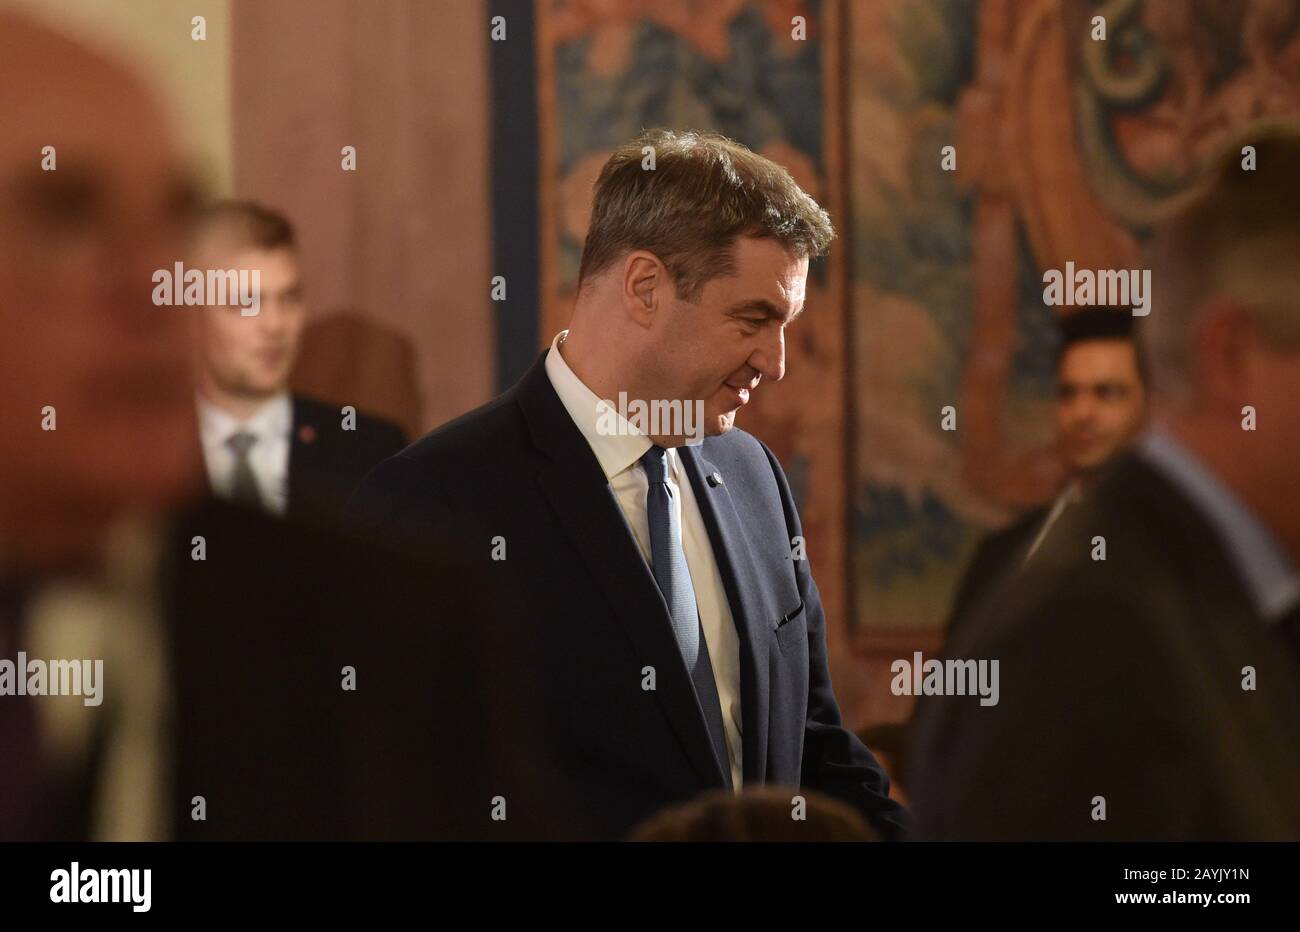 Munich, Germany. 15th Feb, 2020. Markus Söder (CSU), Prime Minister of Bavaria, will attend the traditional dinner for the participants of the Munich Security Conference in the Kaisersaal of the Munich Residence. Credit: Felix Hörhager/dpa/Alamy Live News Stock Photo